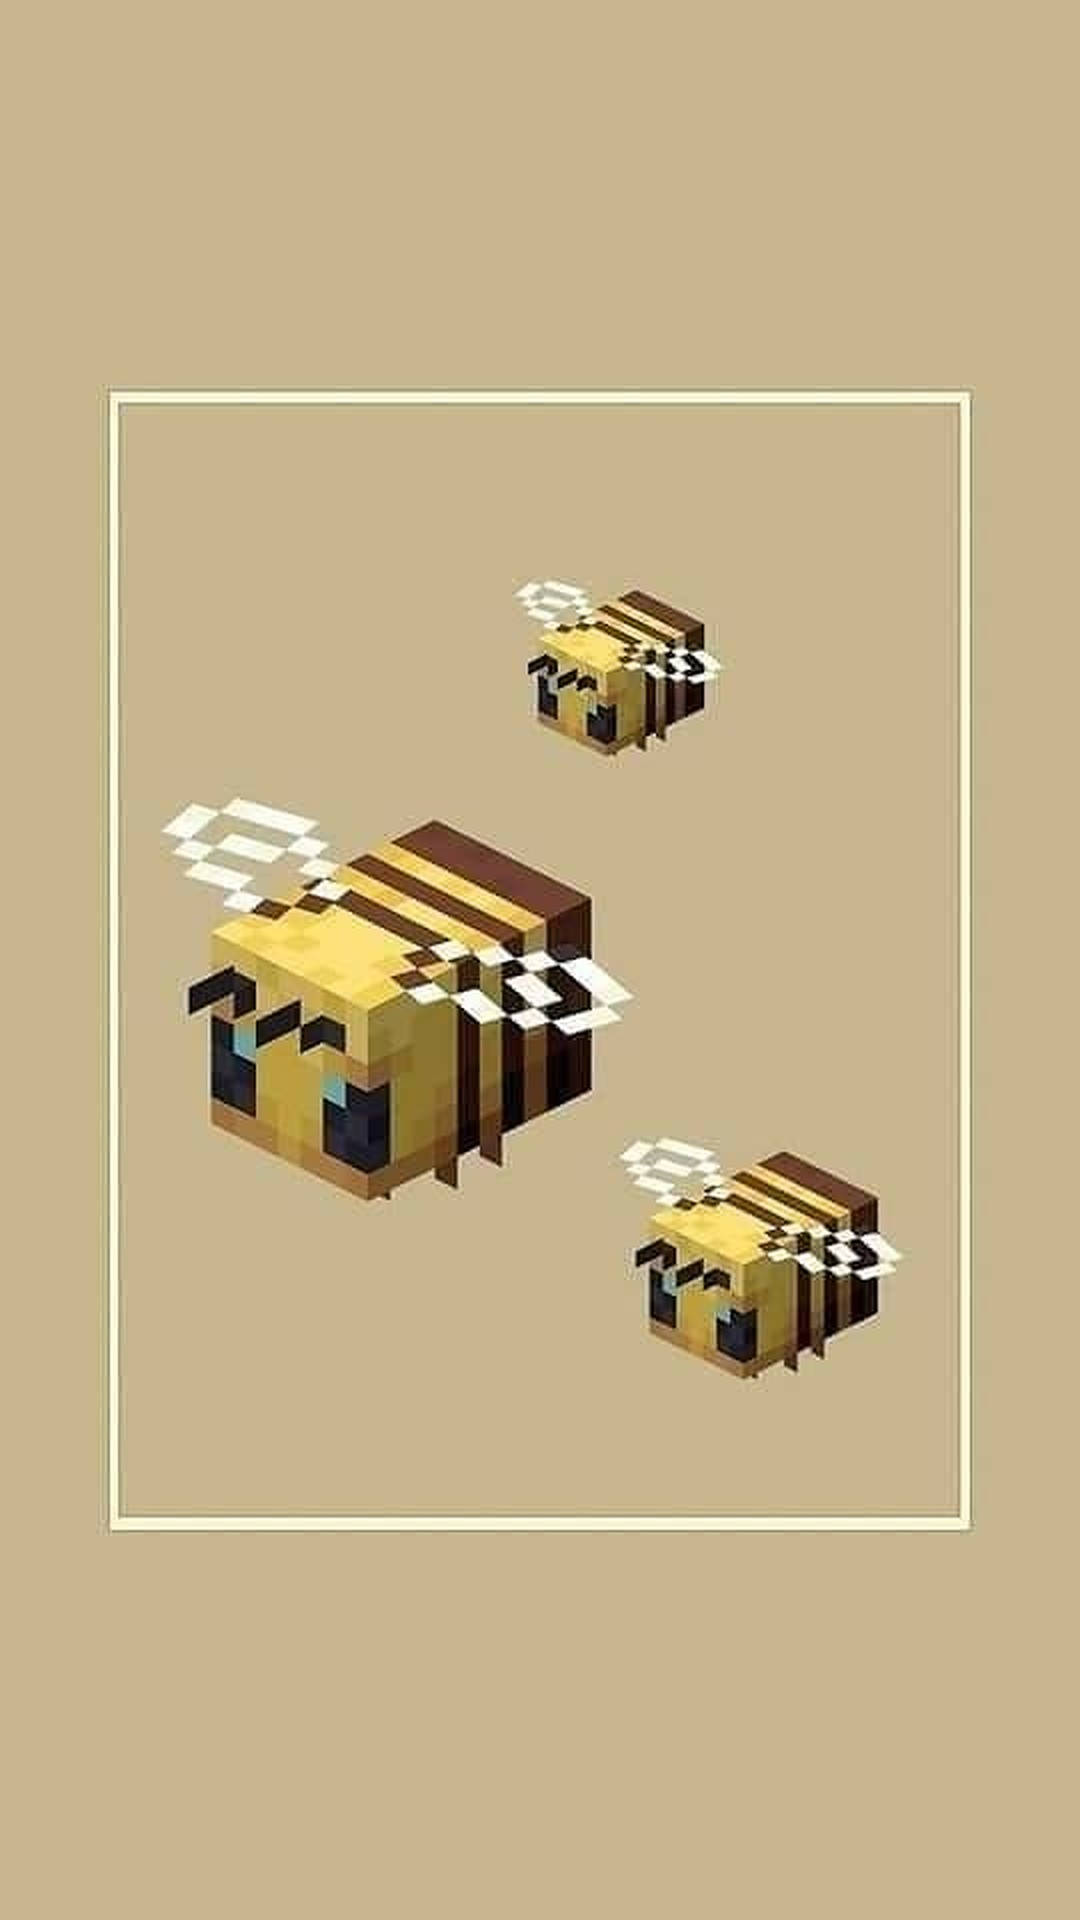 Three Hovering Minecraft Bees Background